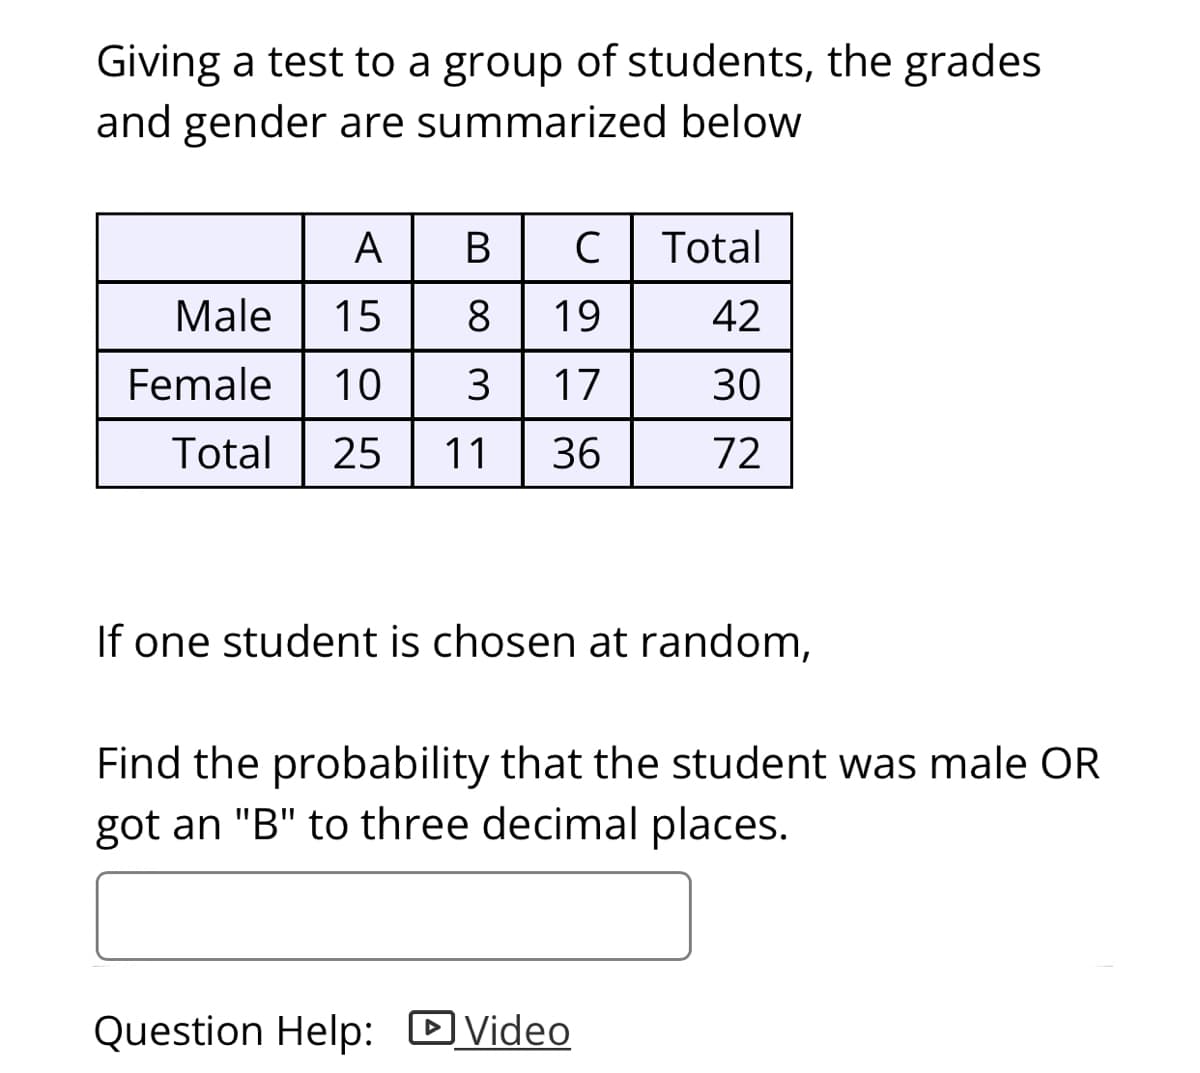 Giving a test to a group of students, the grades
and gender are summarized below
A
В
C
Total
Male
15
8
19
42
Female
10
17
30
Total
25
11
36
72
If one student is chosen at random,
Find the probability that the student was male OR
got an "B" to three decimal places.
Question Help: DVideo
